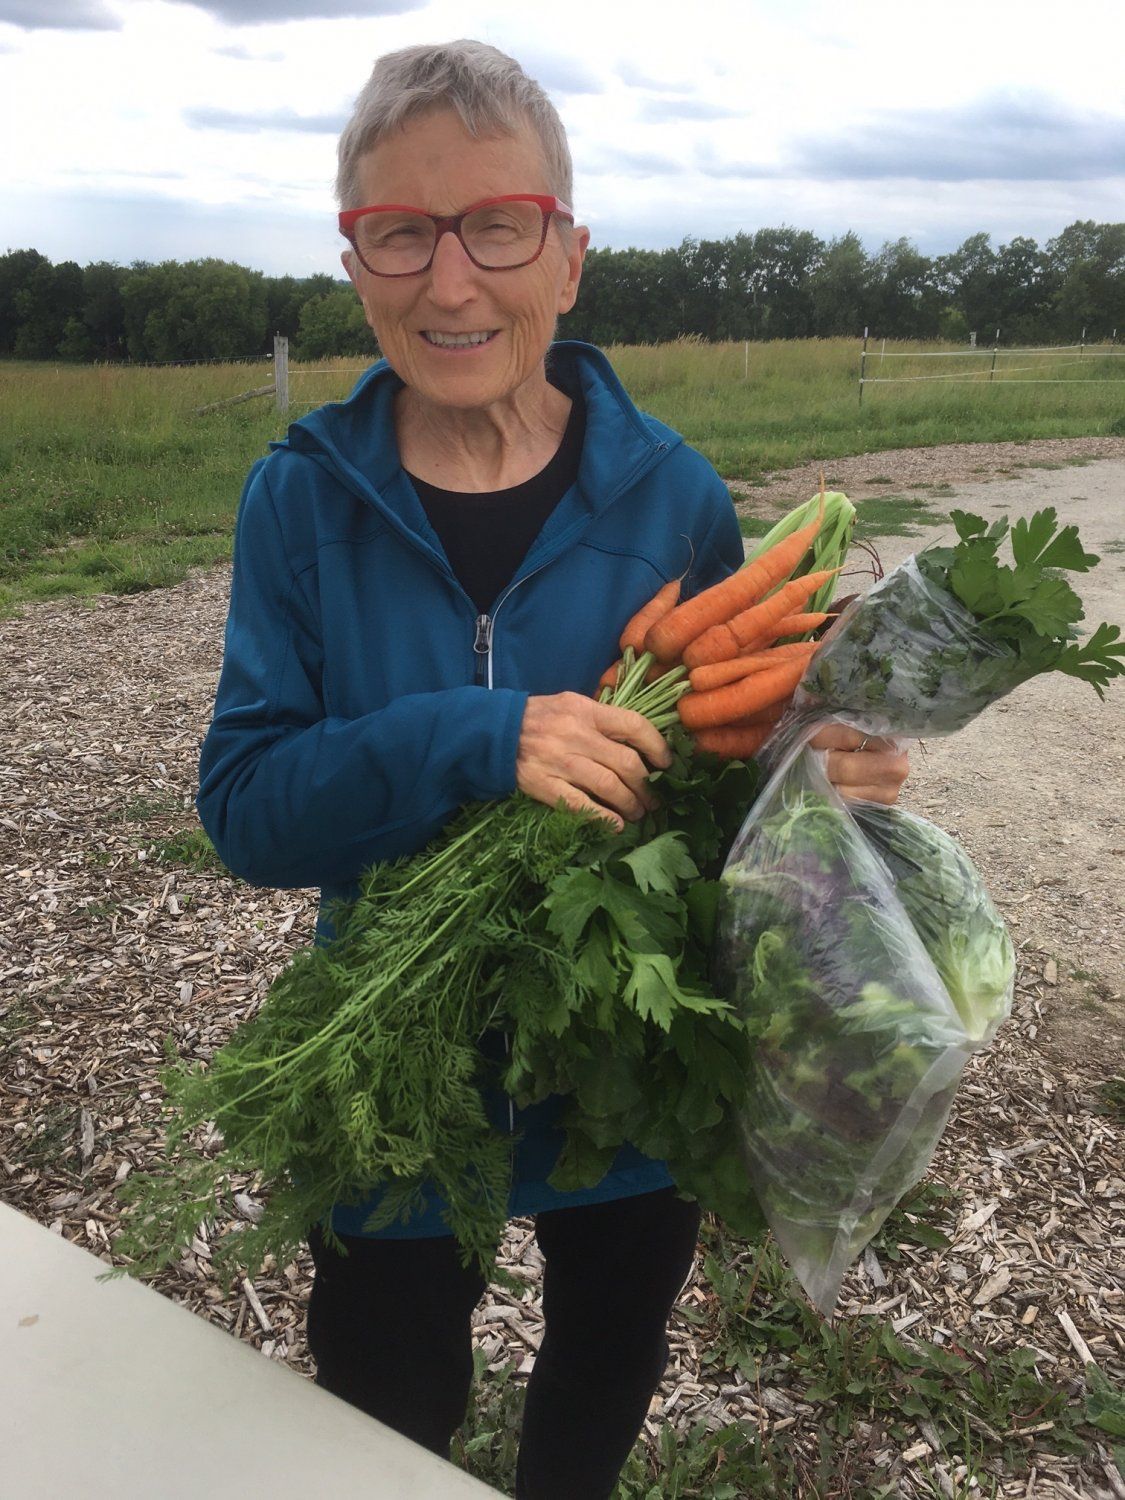 Next Happening: Making the Most of Your CSA share